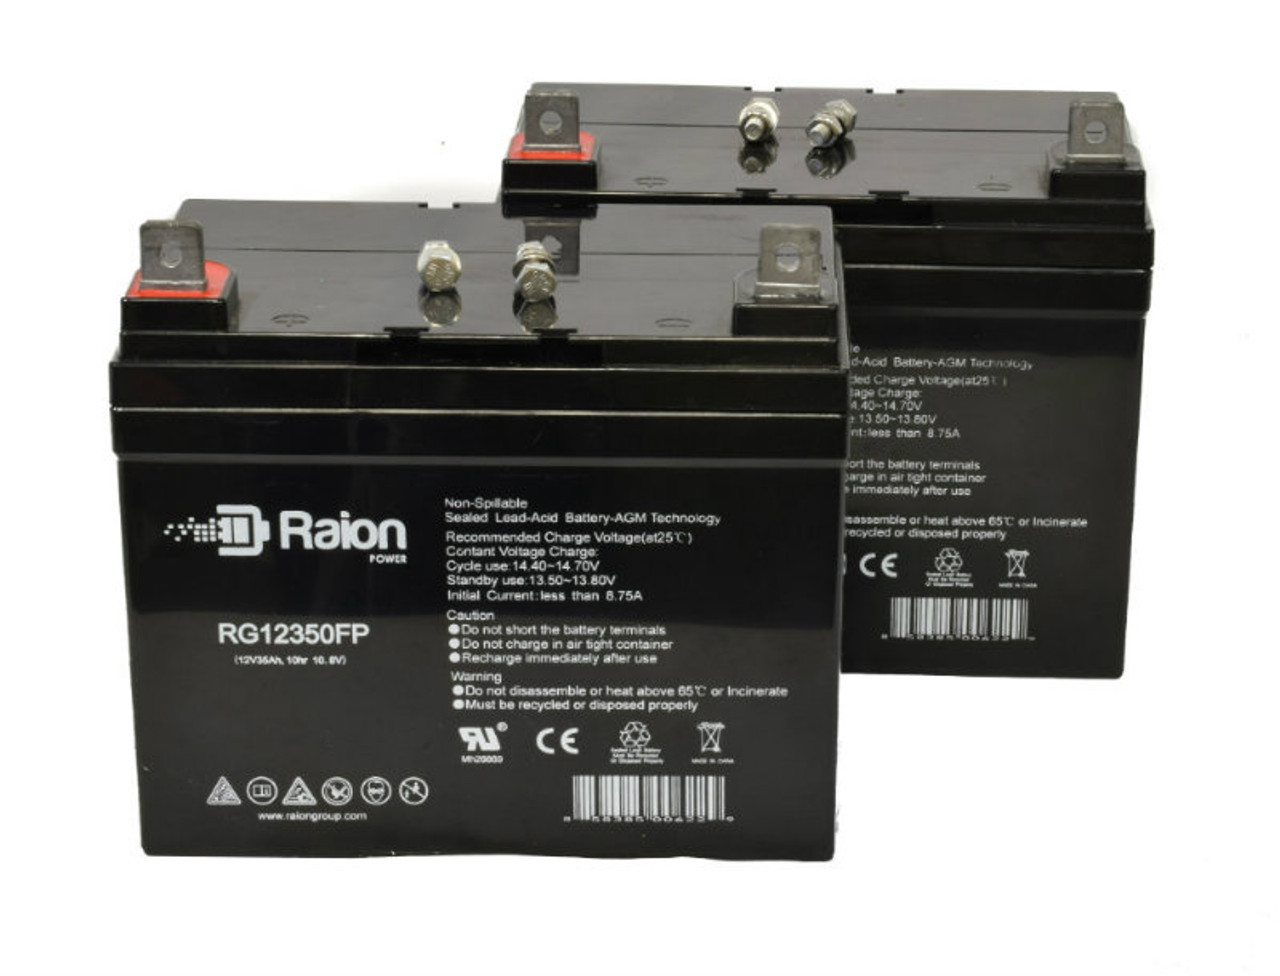 Raion Power Replacement 12V 35Ah Lawn Mower Battery for Agco Allis 413H - 2 Pack